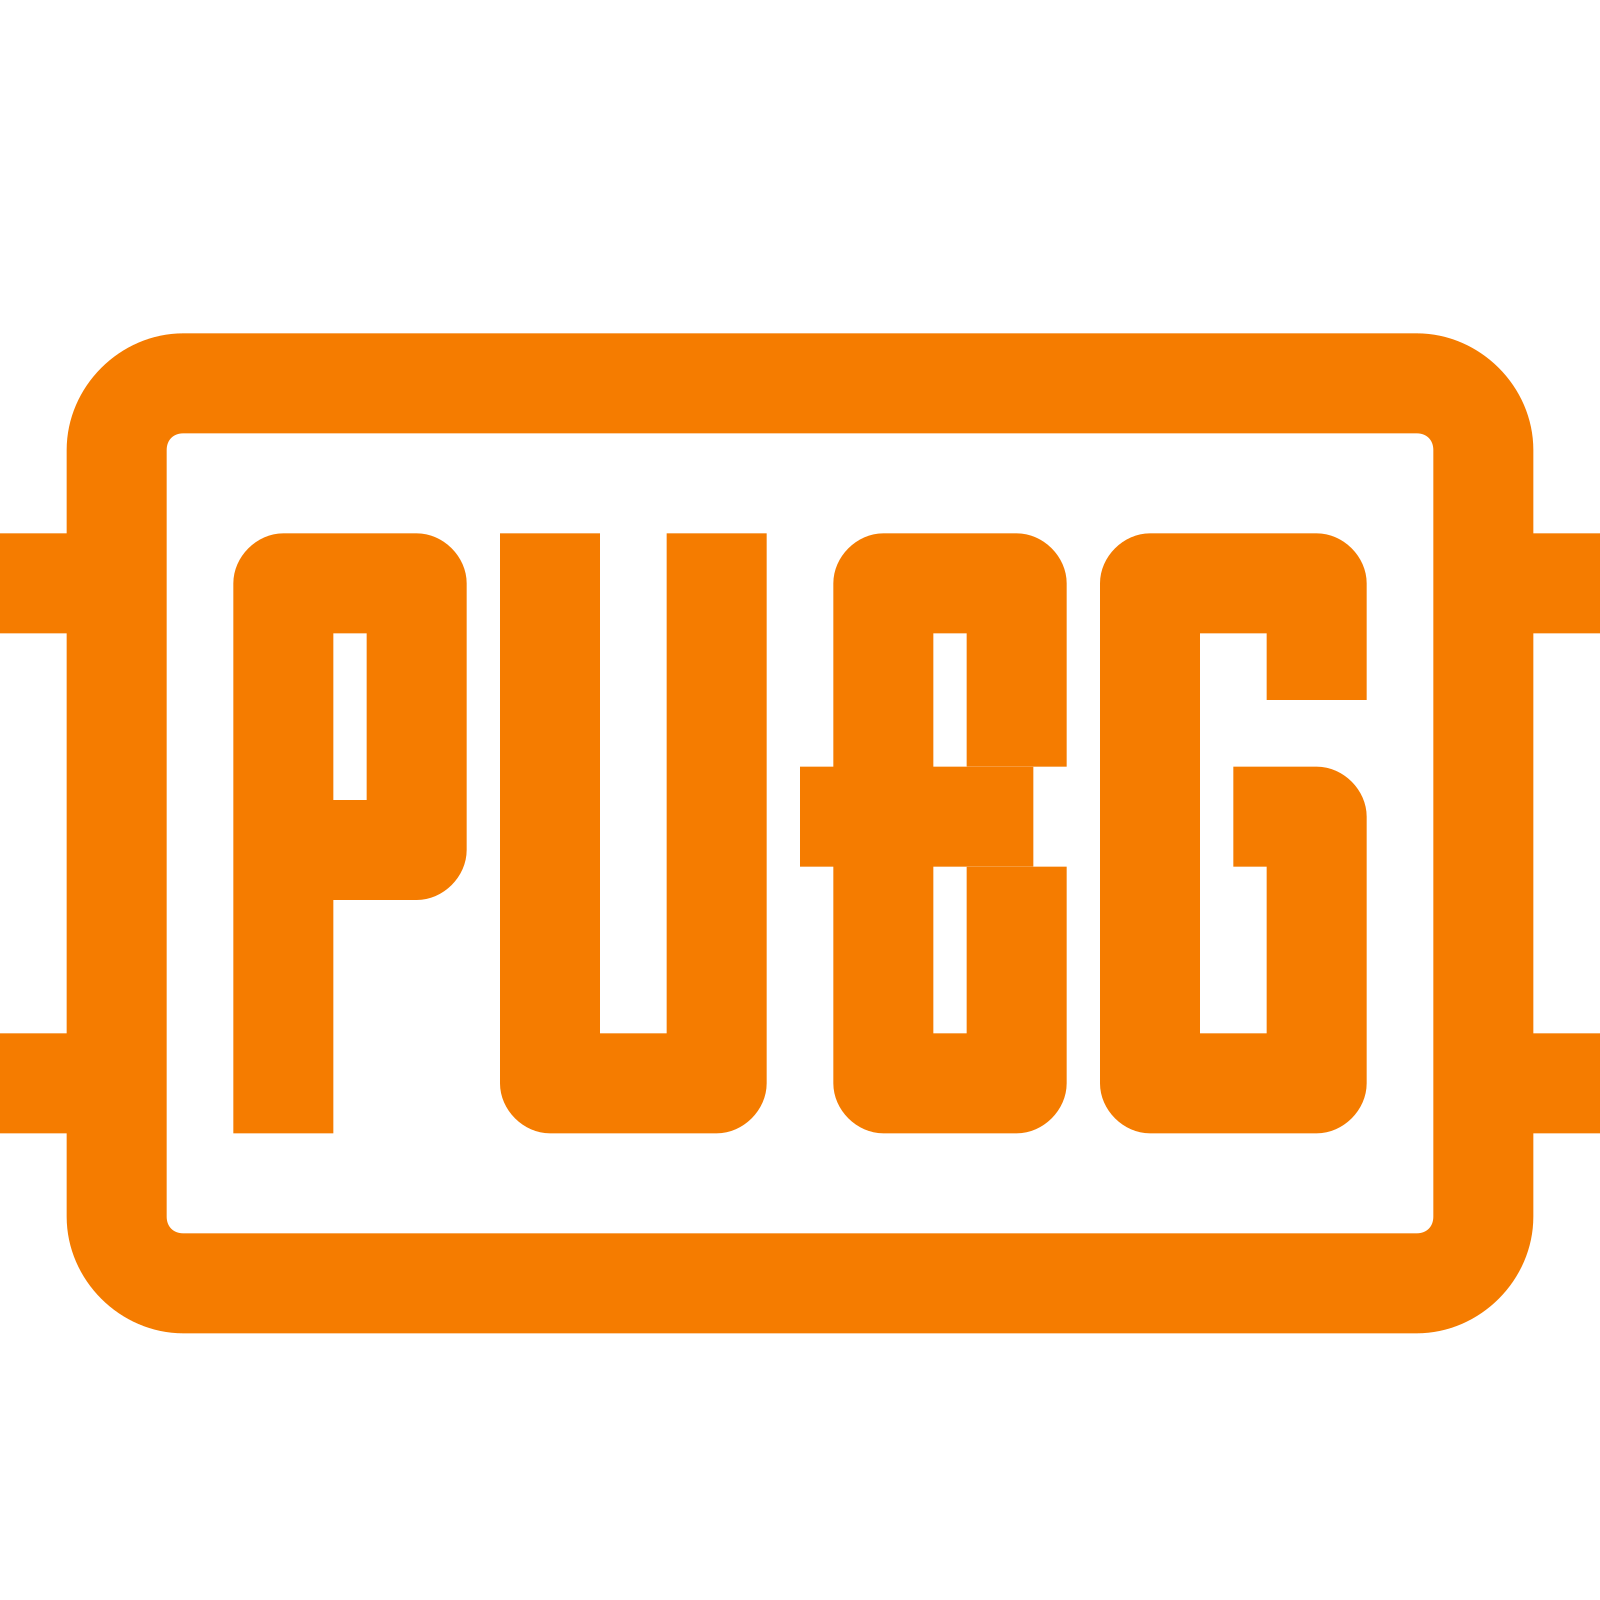 PUBG Icon - free download, PNG and vector